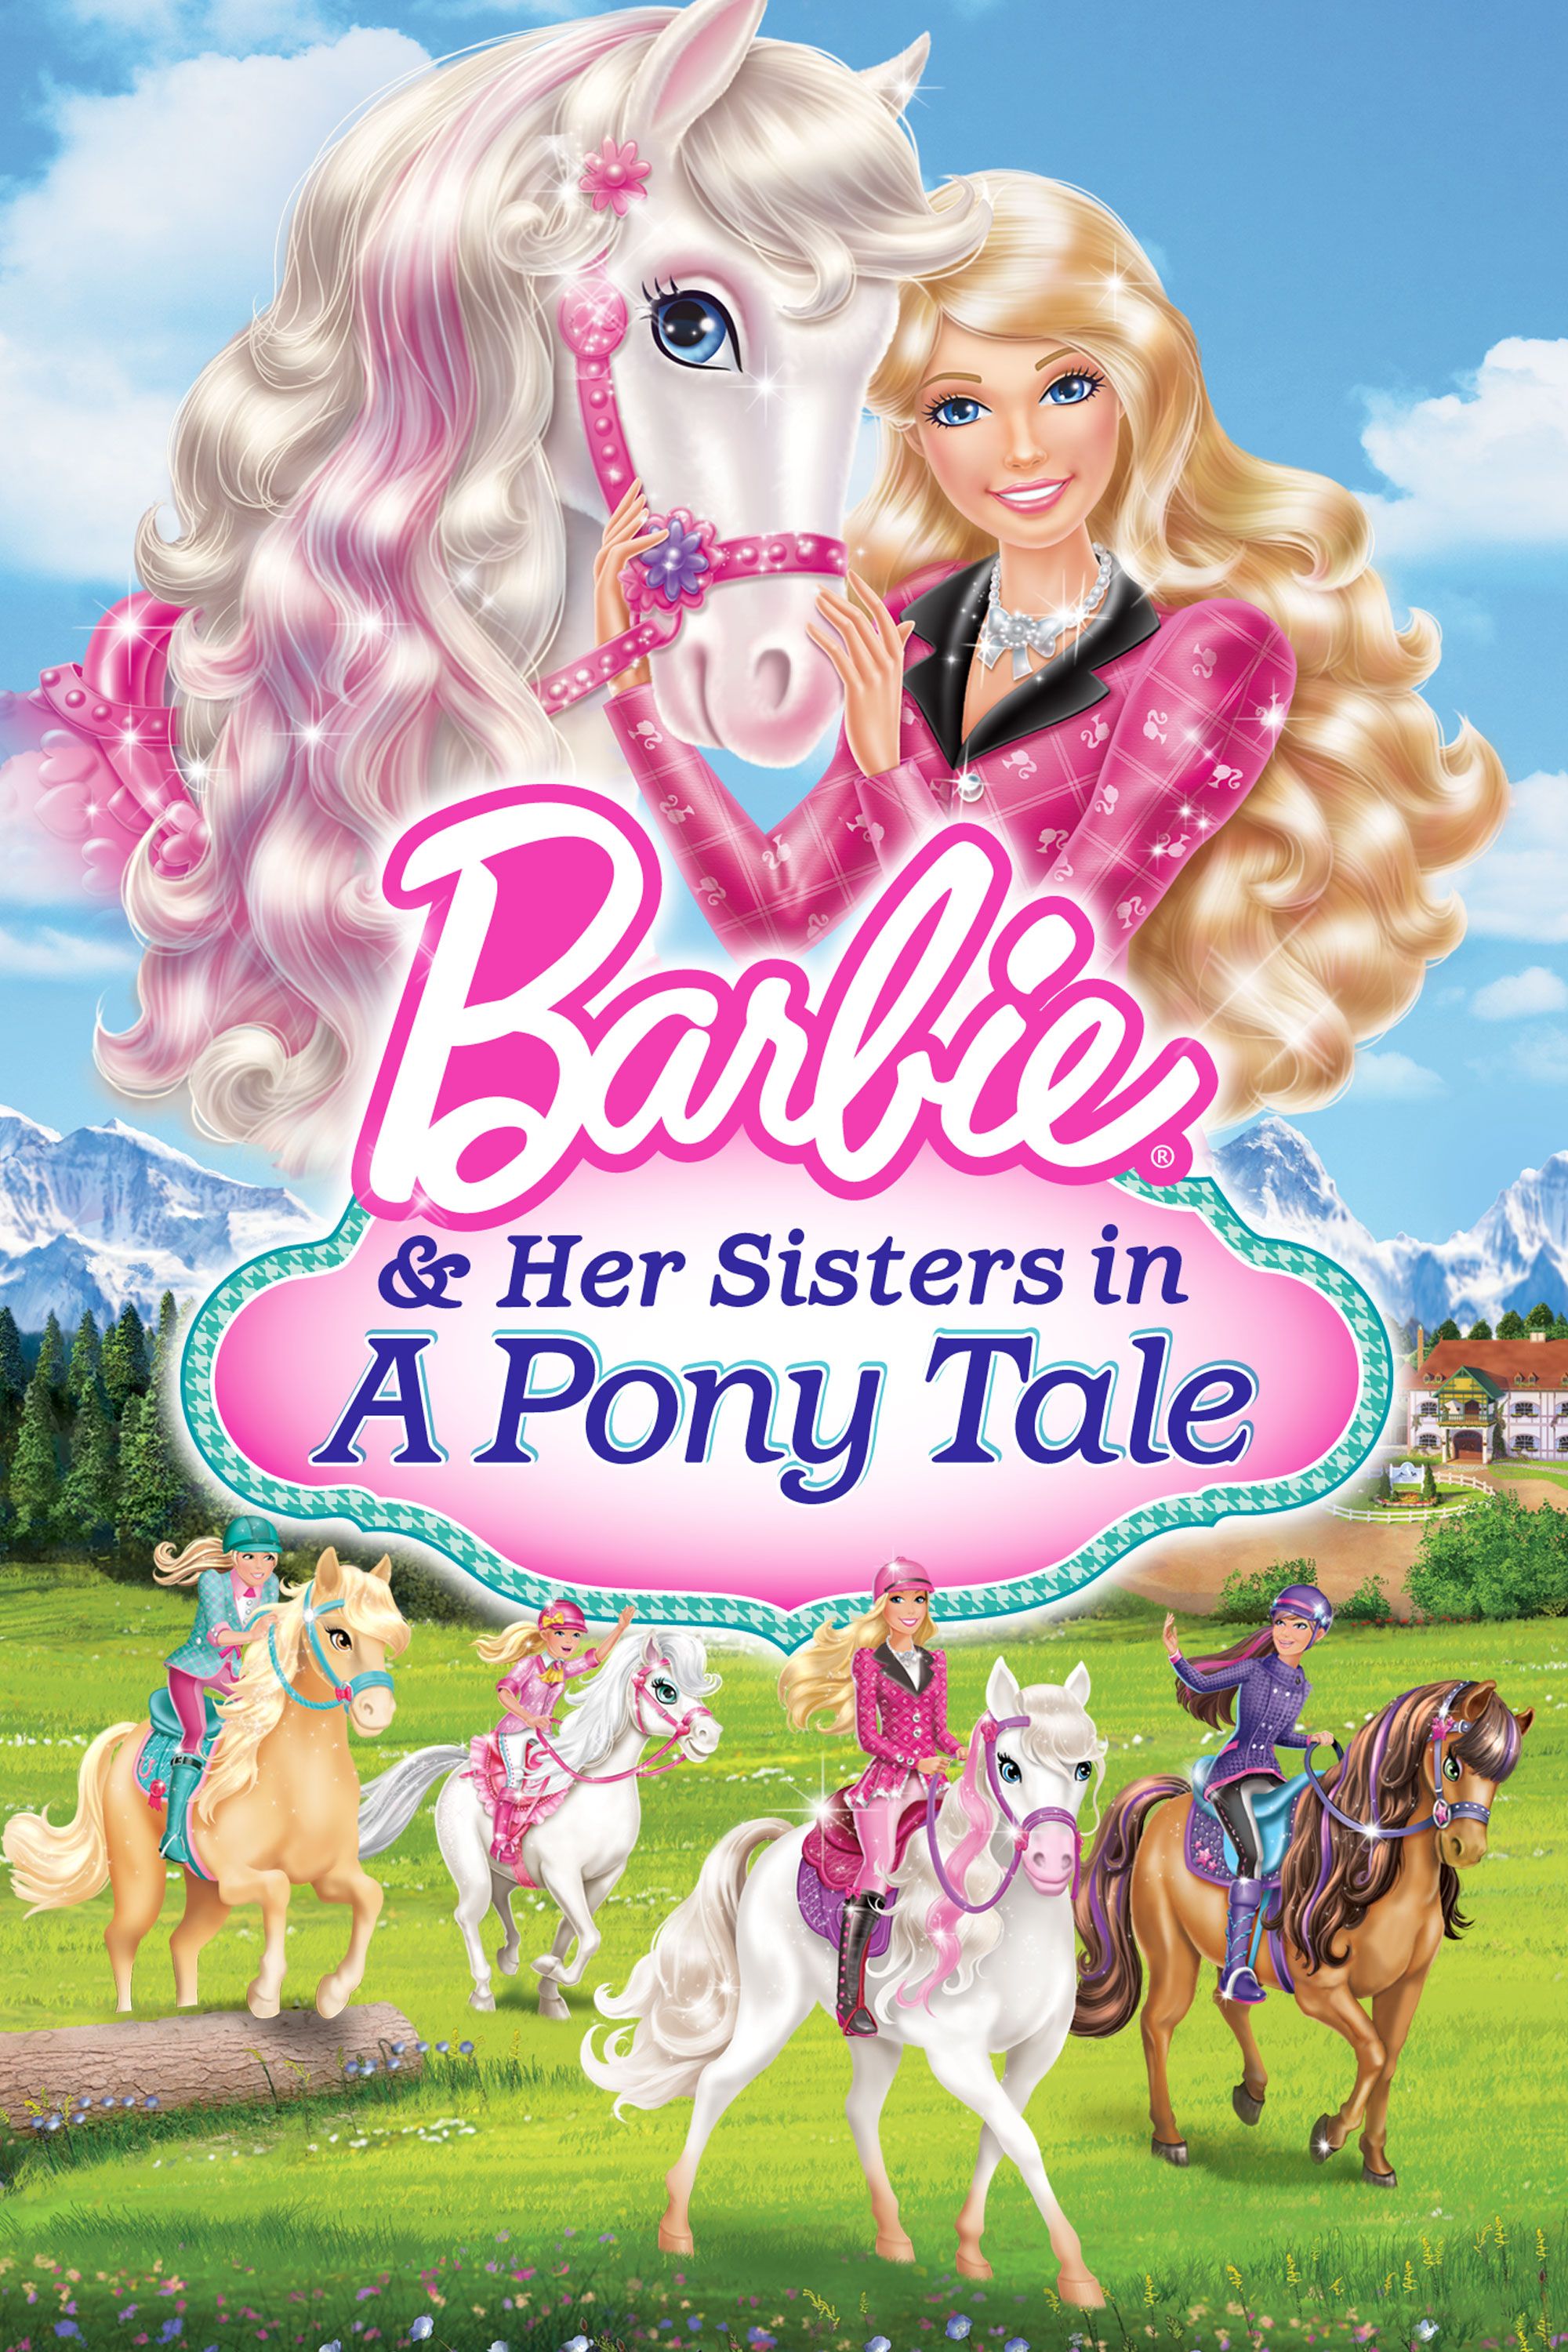 barbie and her sisters in a pony tale full movie in english